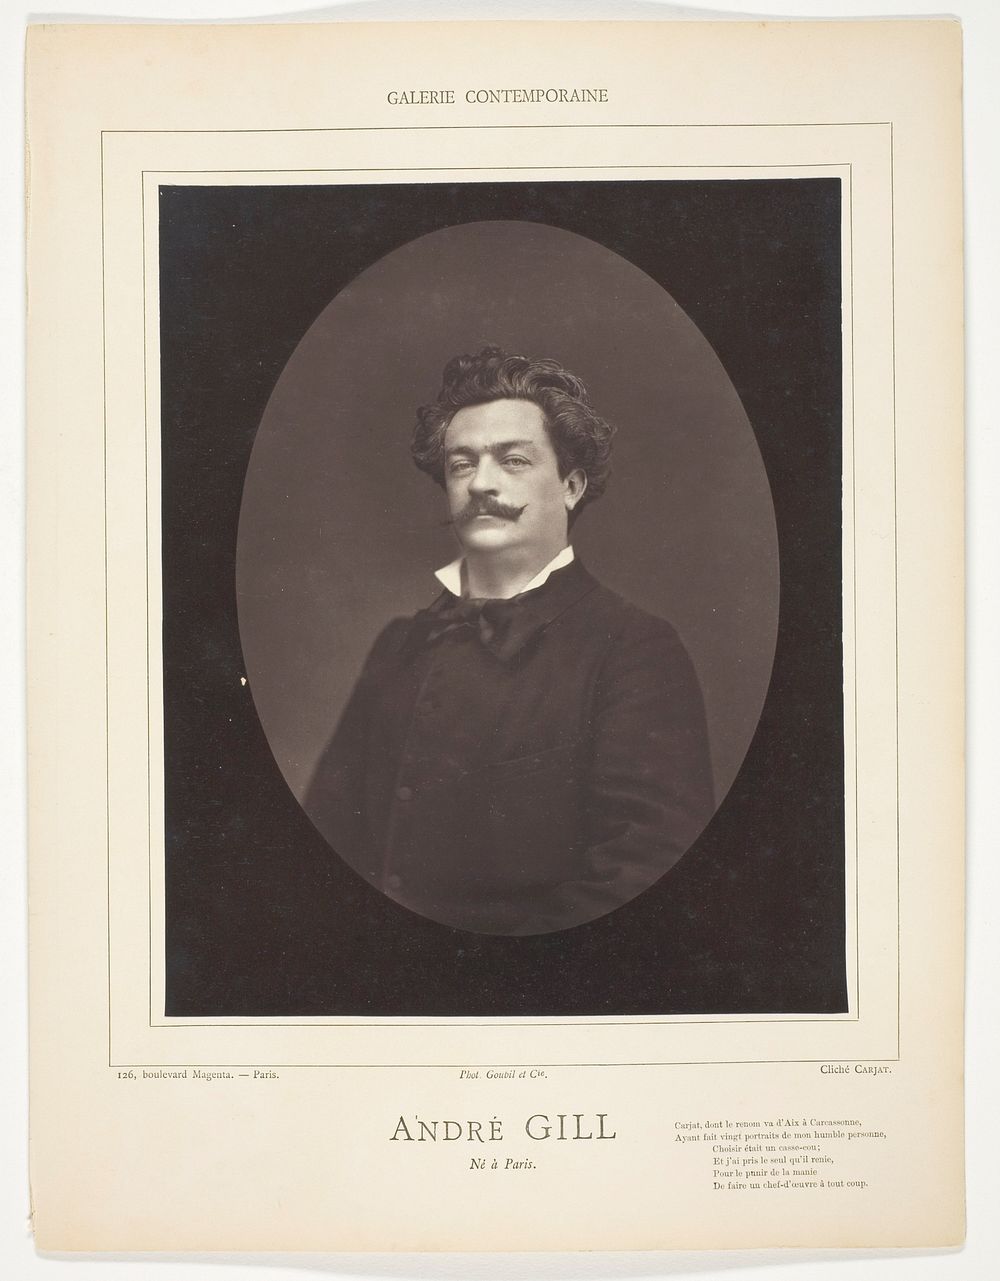 André Gill (French caricaturist, 1840-1885) by Etienne Carjat